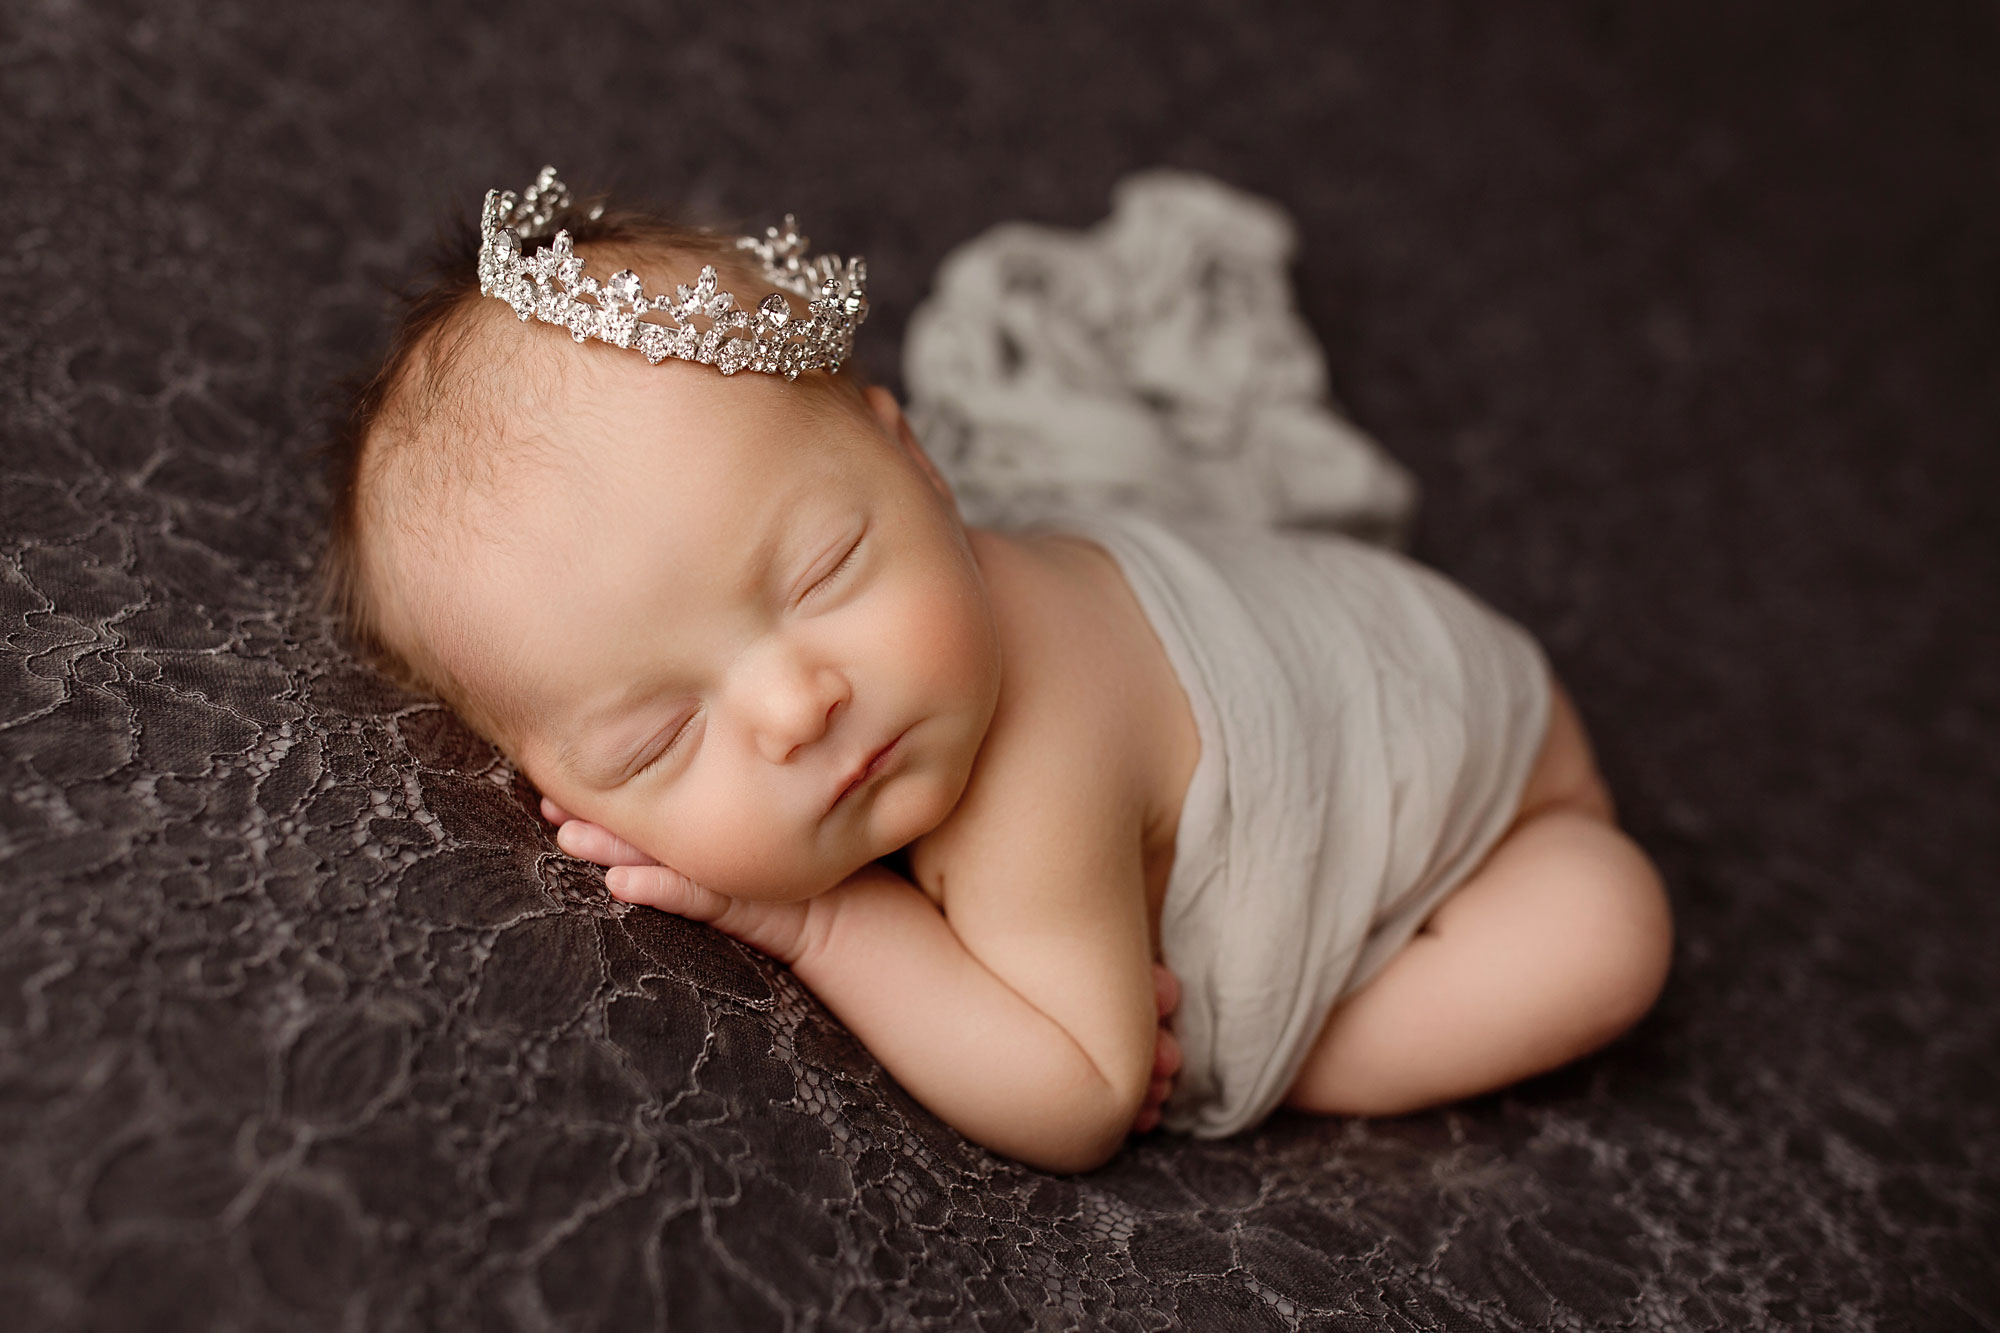 baby girl newborn photography long valley, baby in wrap and tiara sleeping on dark textured background